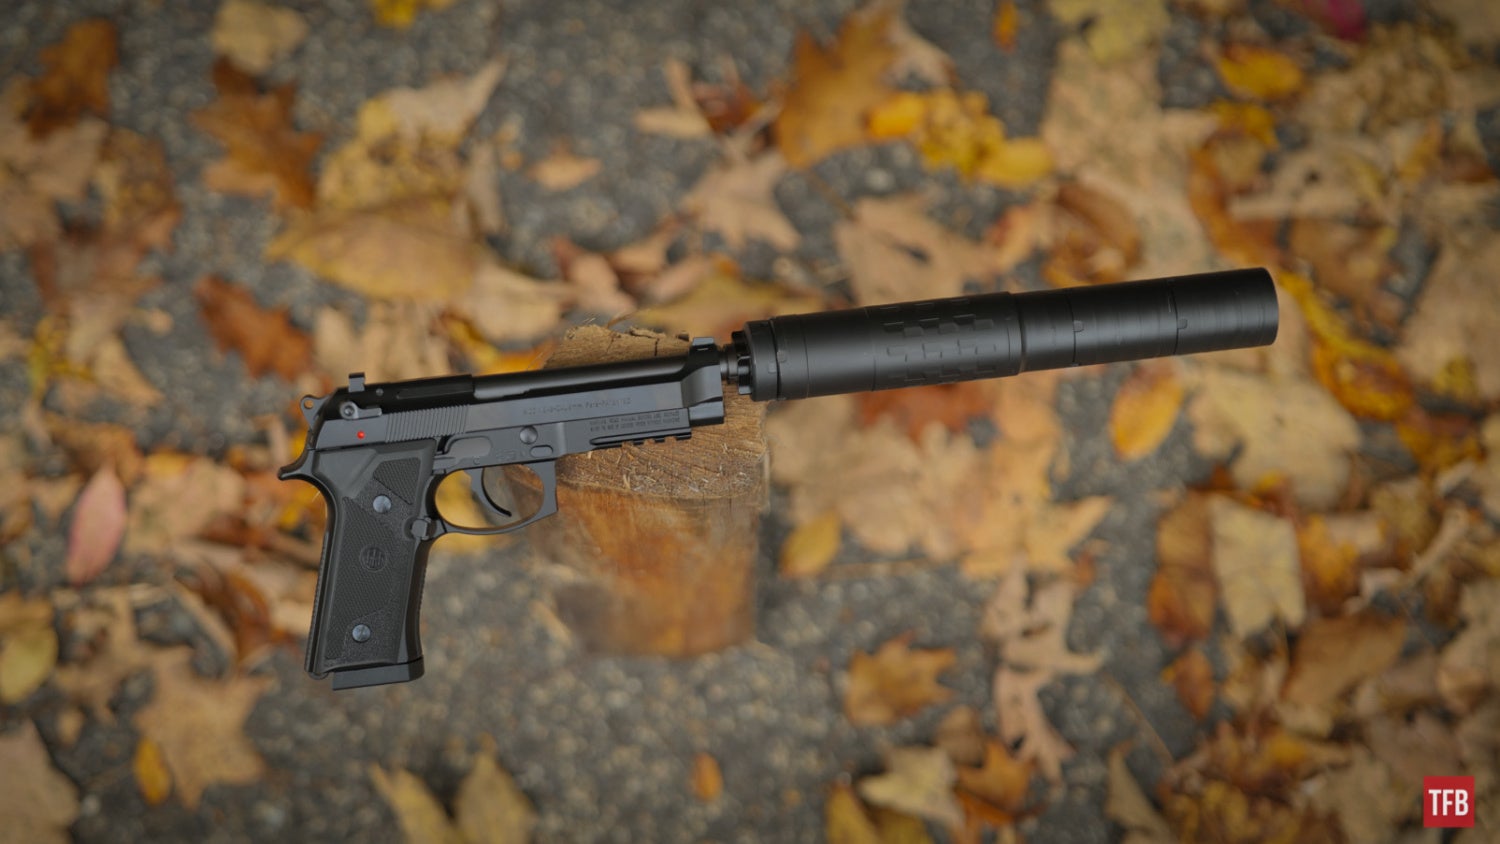 SILENCER SATURDAY #198: The SilencerCo Hybrid 46M - A Can For All Seasons